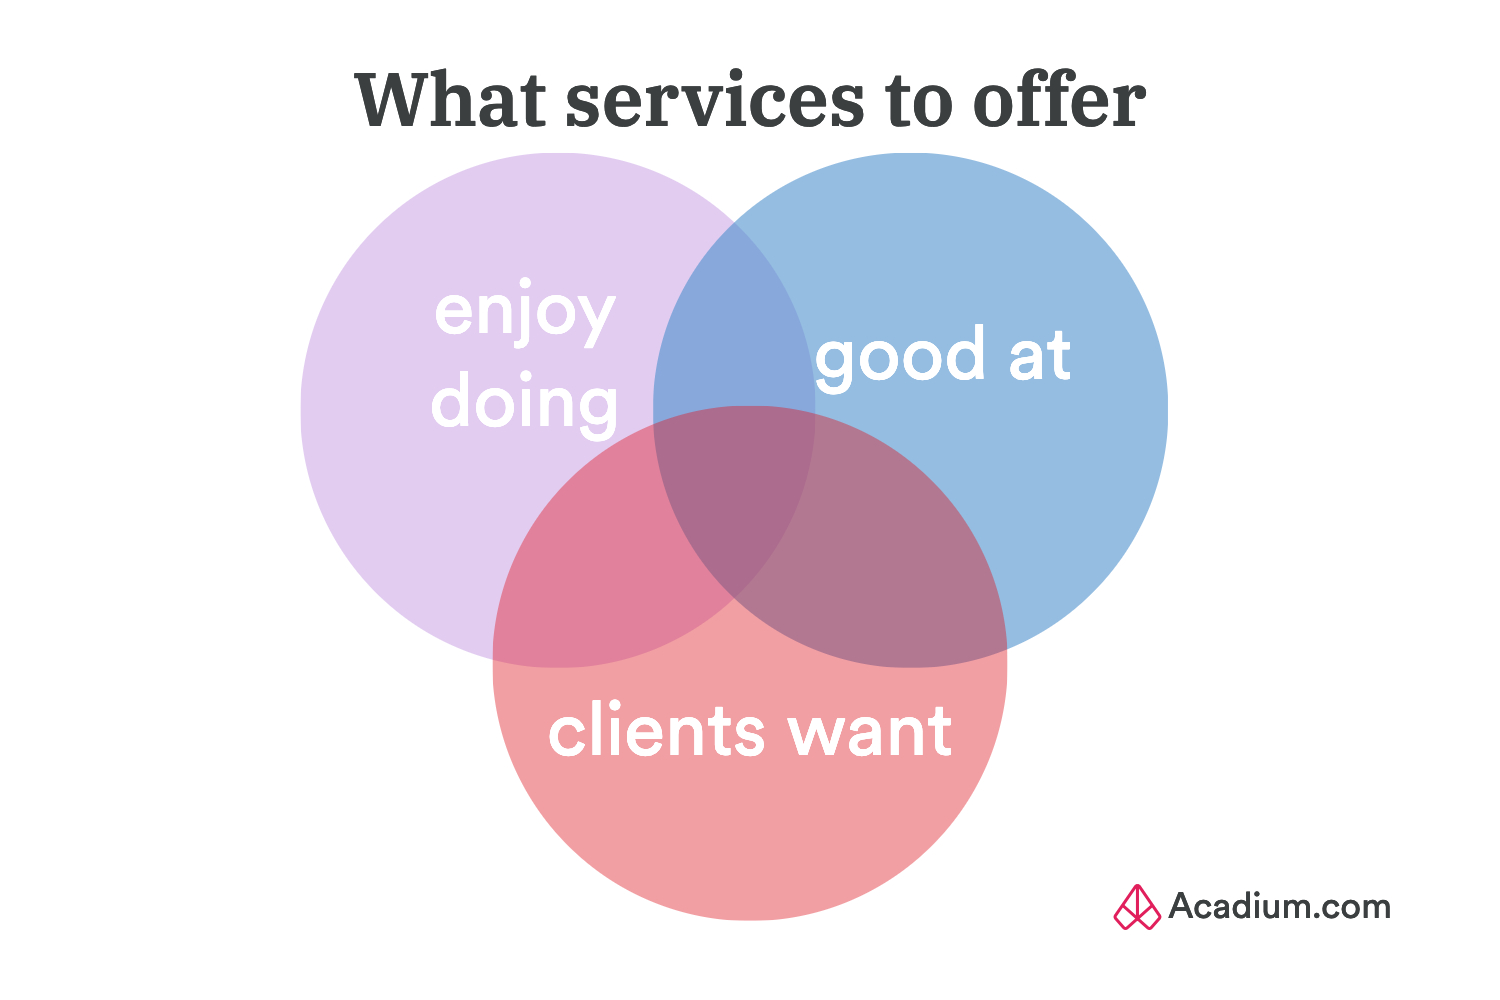 how to start an agency - what services to offer